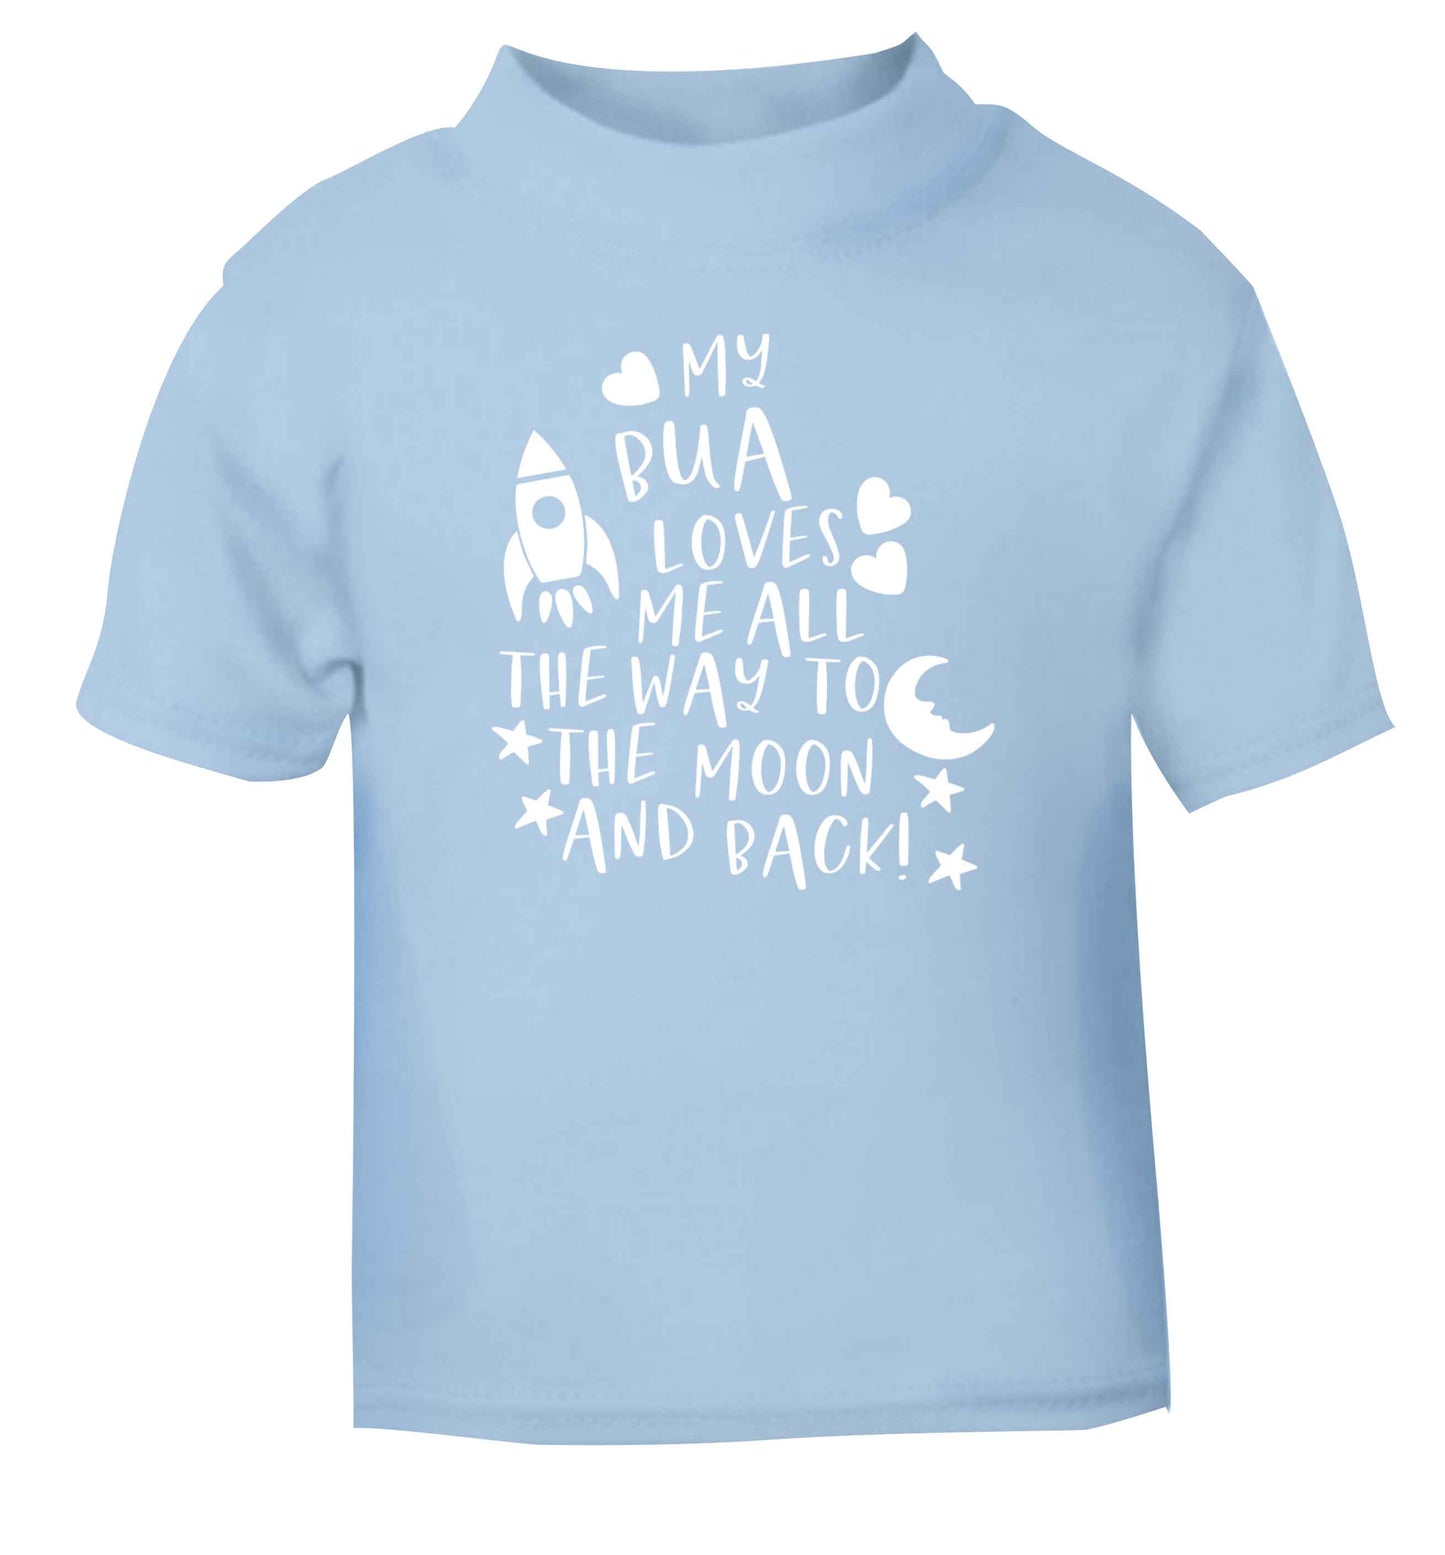 My bua loves me all they way to the moon and back light blue Baby Toddler Tshirt 2 Years